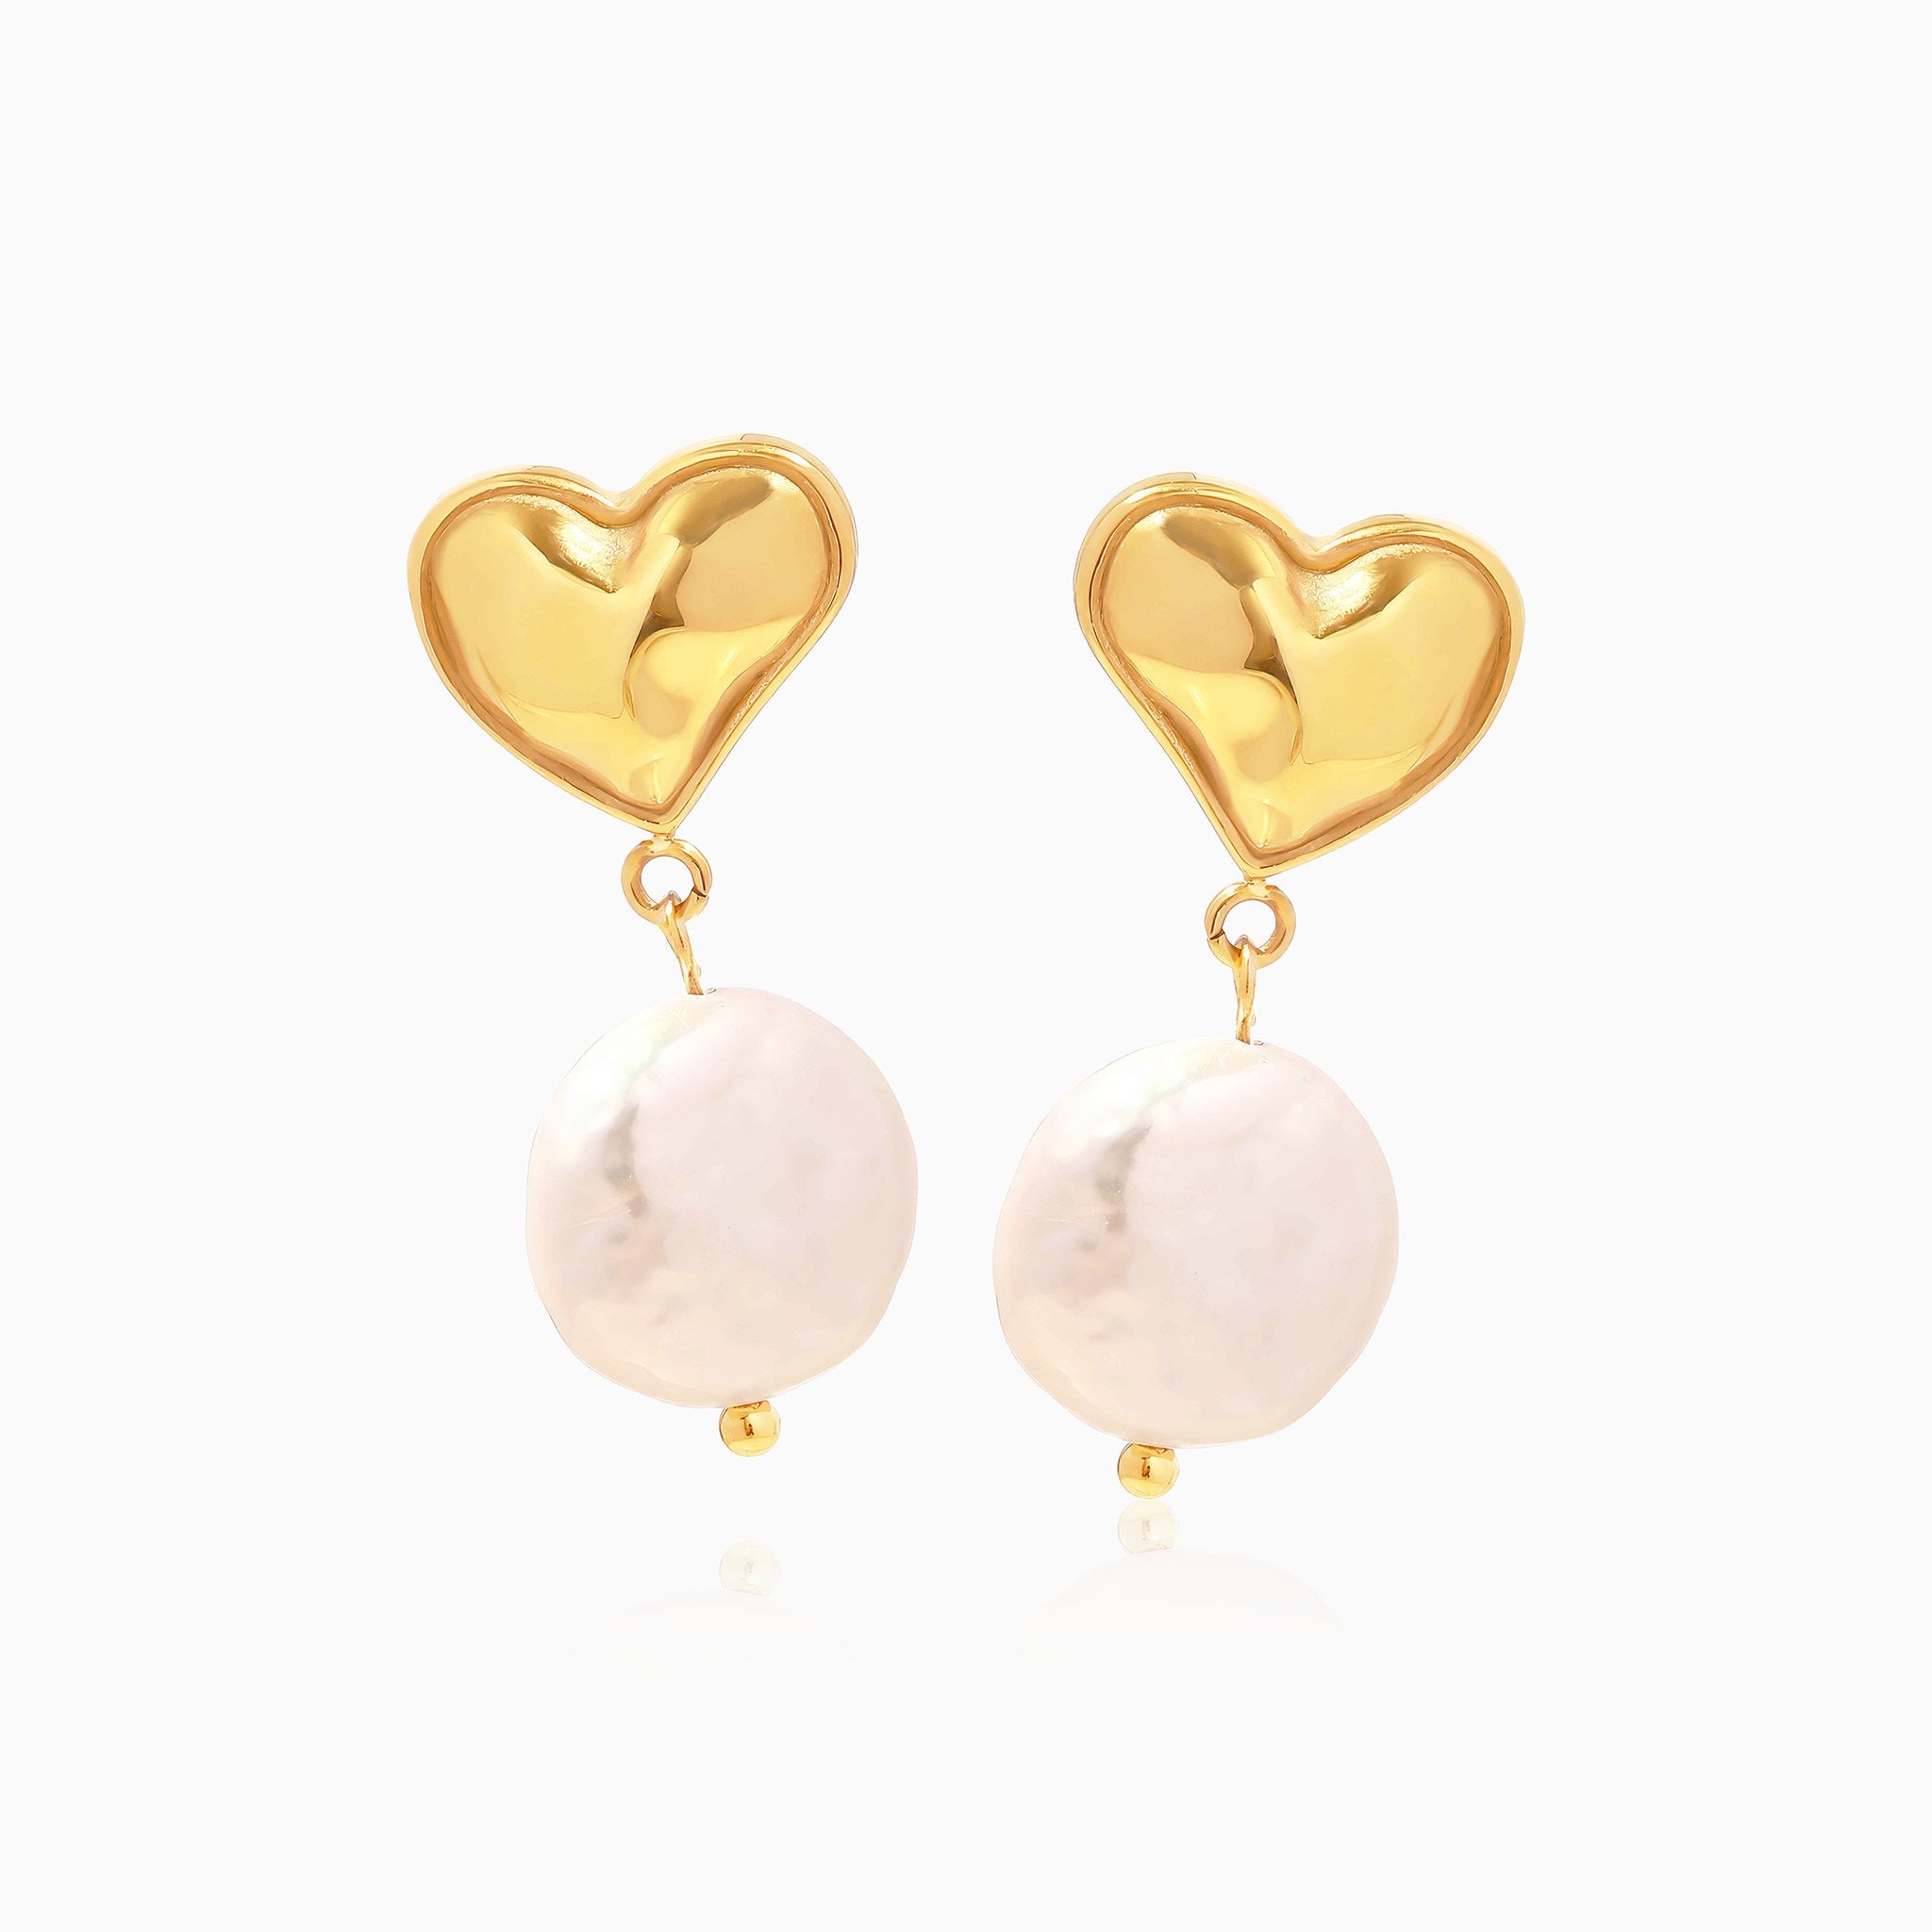 Retro Heart & Baroque Pearl Pendant Earrings - Nobbier - Earrings - 18K Gold And Titanium PVD Coated Jewelry